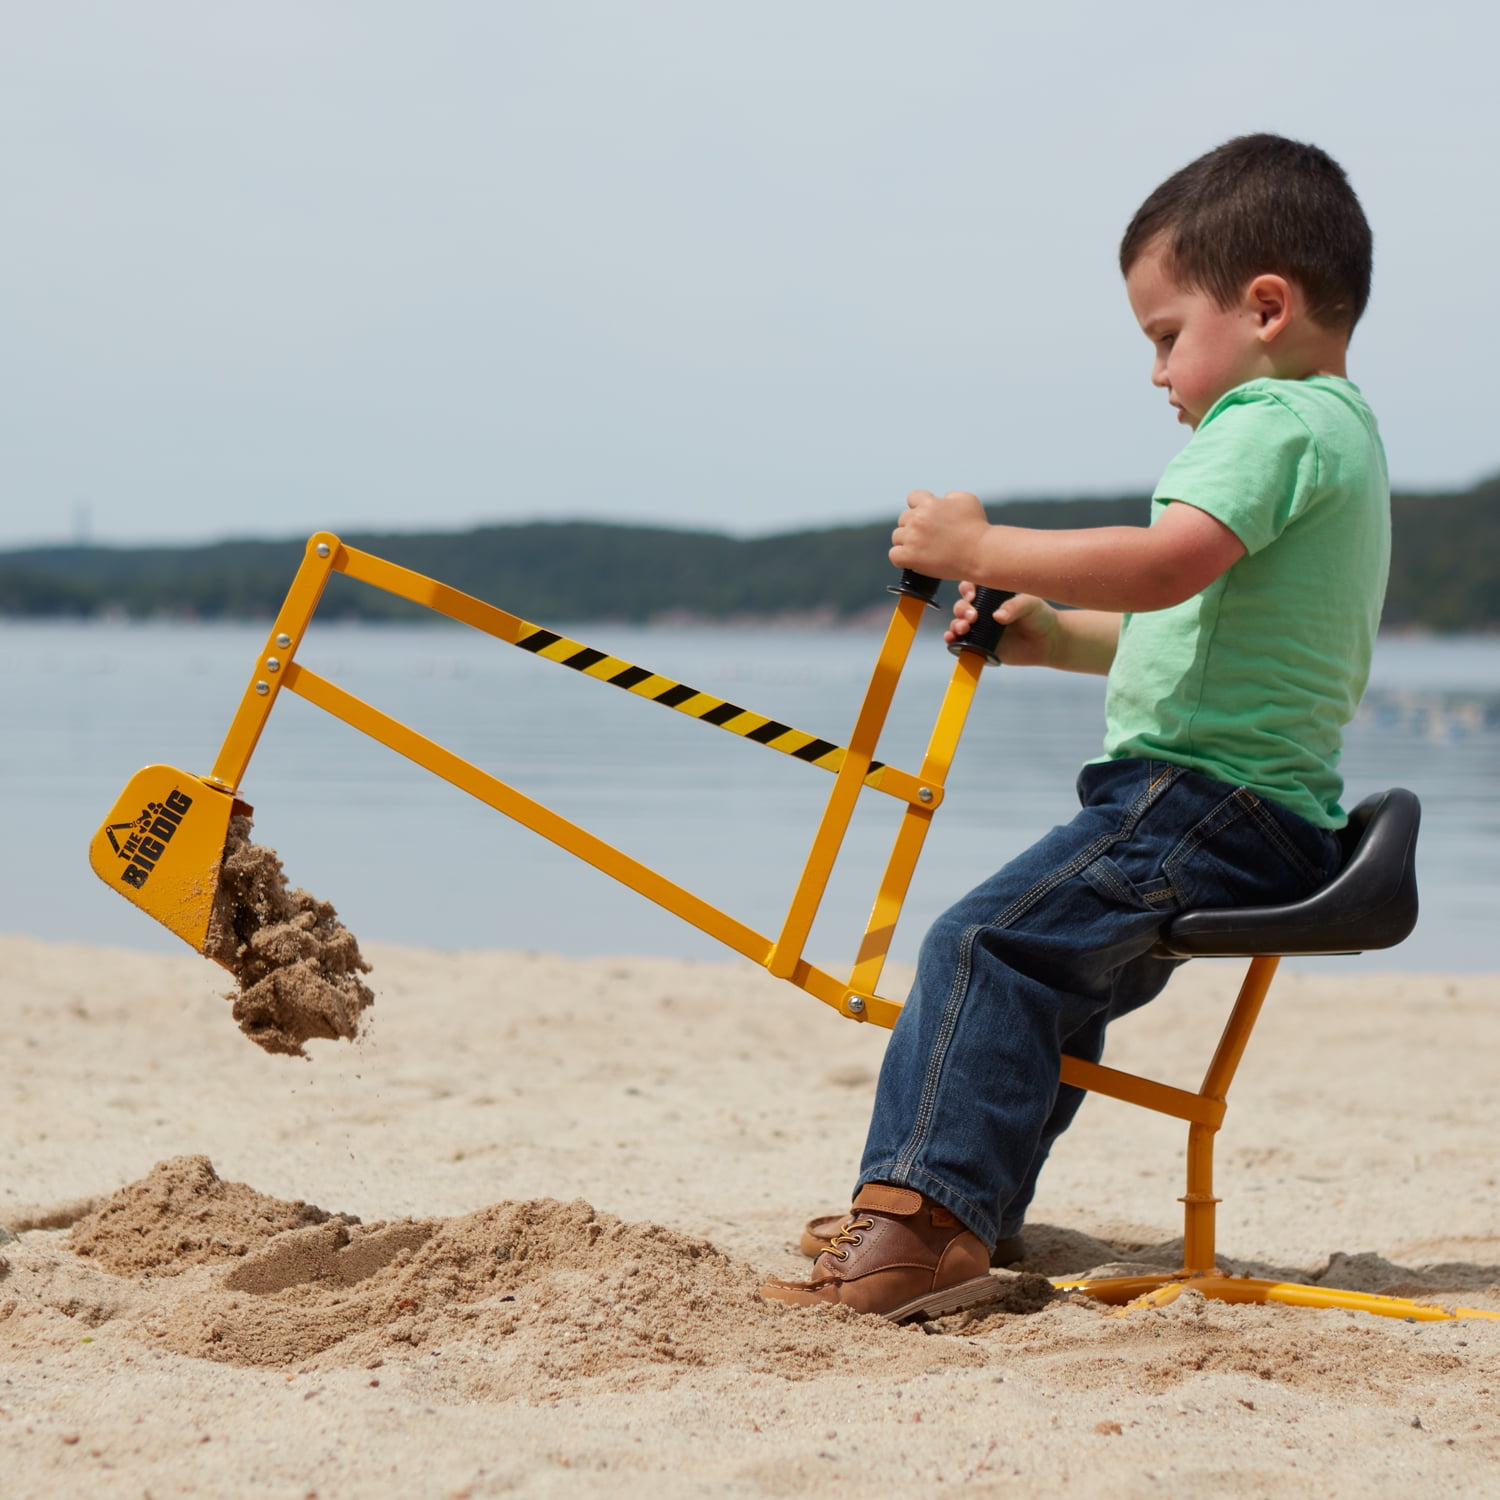 Childrens Summer Beach Big Excavator Sandbox Fun and Cool Beach Toy Tools Multifunctional Play Sand Play Water Games Childrens Educational Toys 